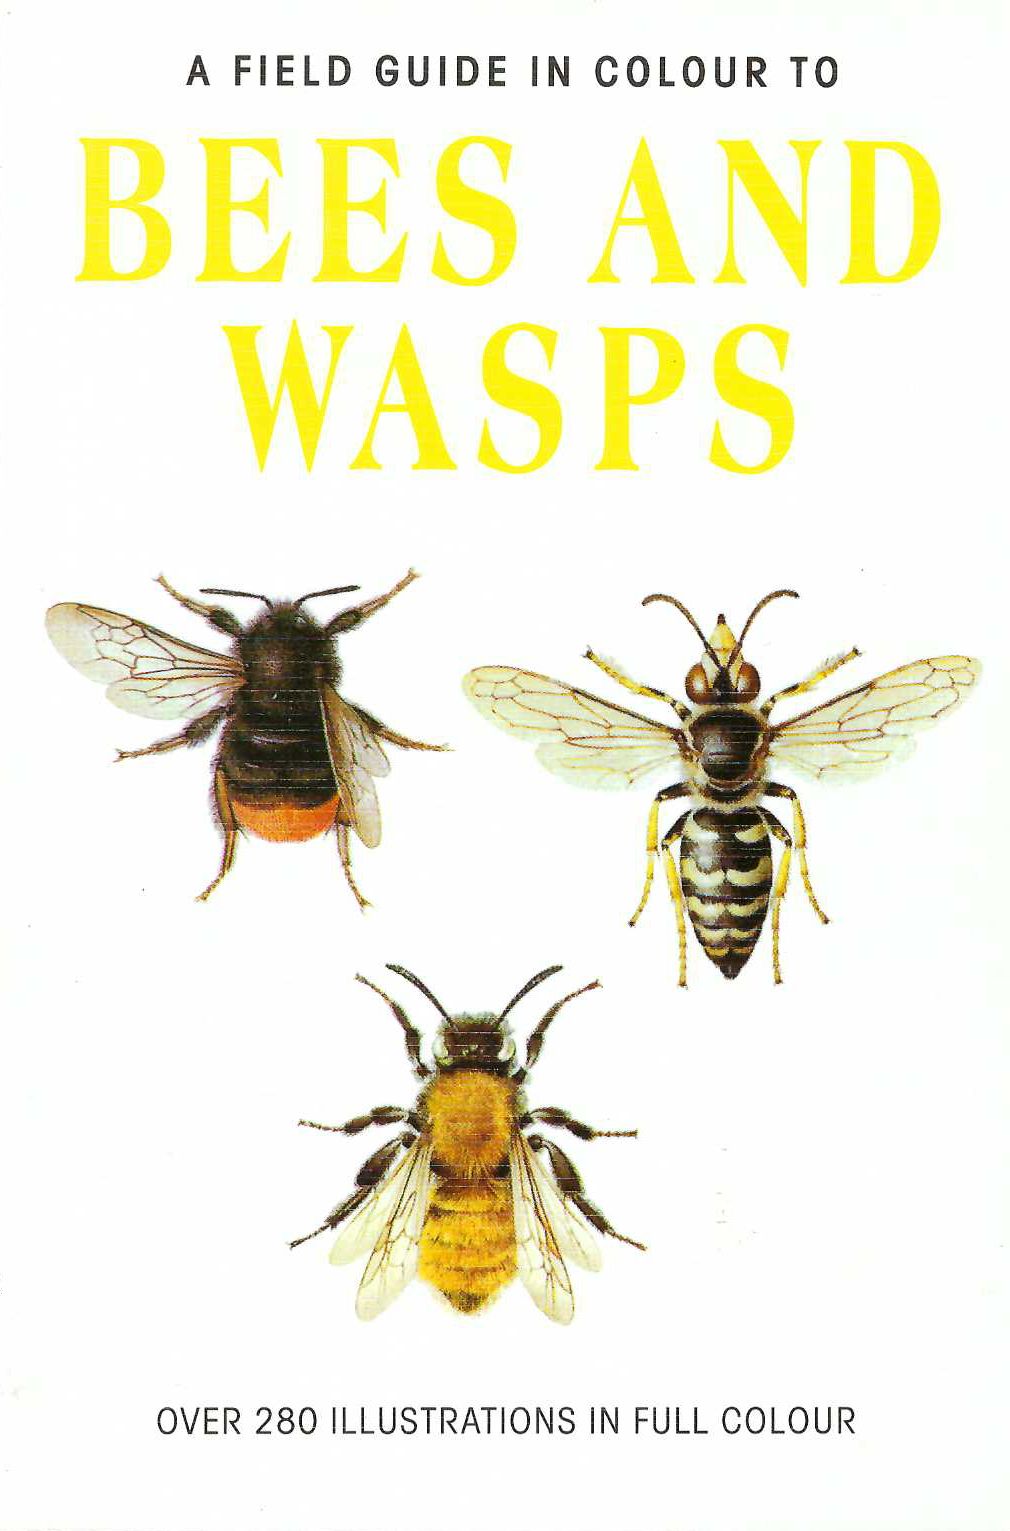 A Field Guide in Colour to Bees and Wasps.